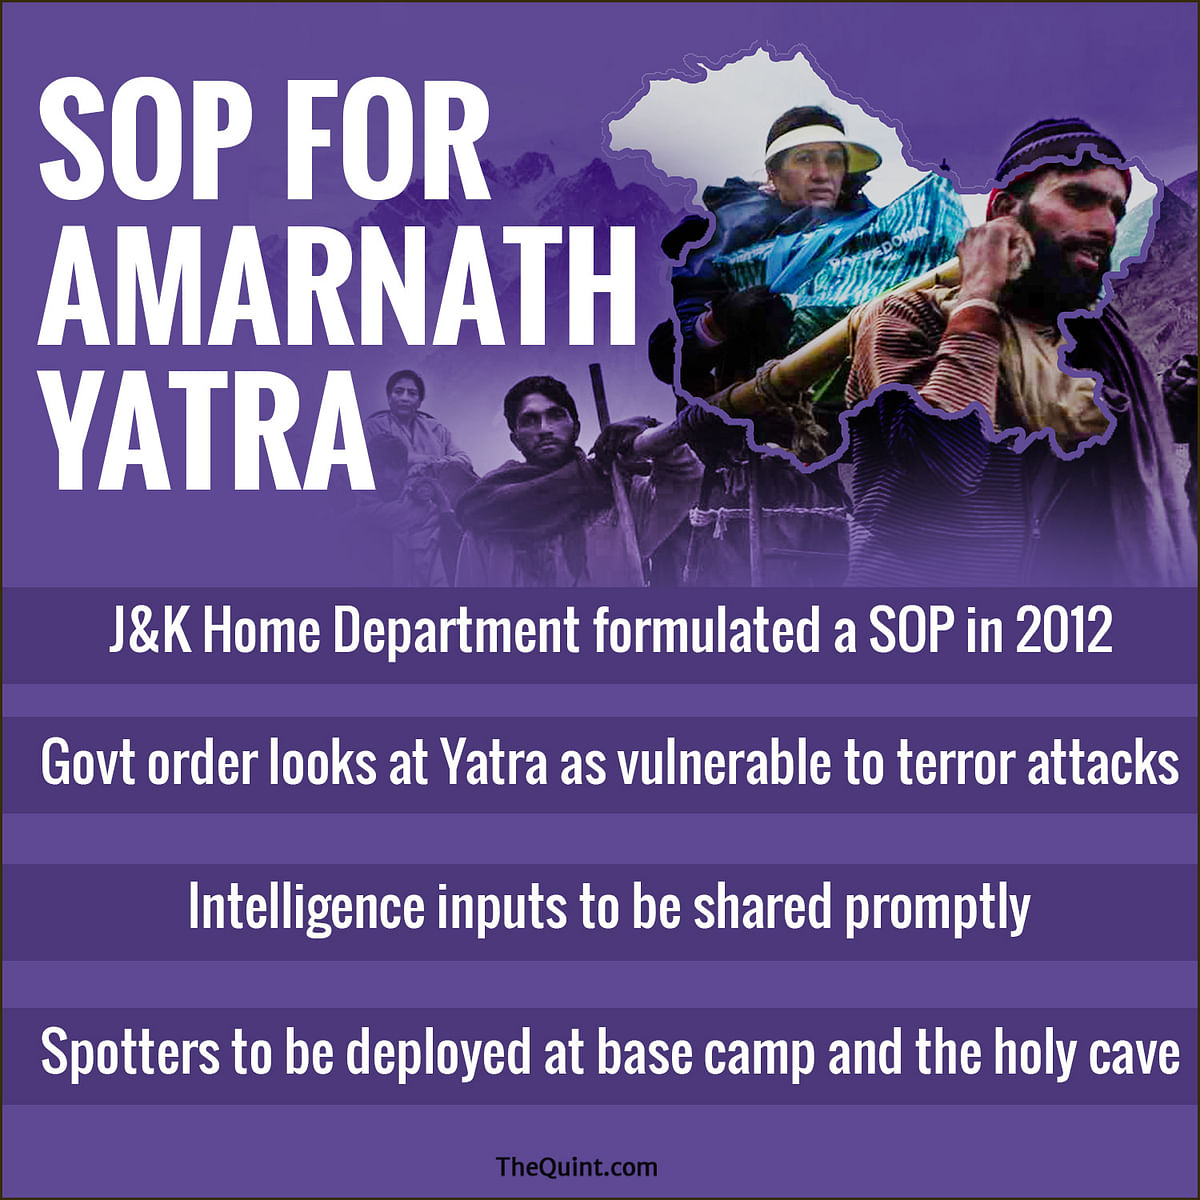 In 2000, Mukherjee Panel had questioned CRPF over security for Amarnath yatris; why have no lessons been learnt?